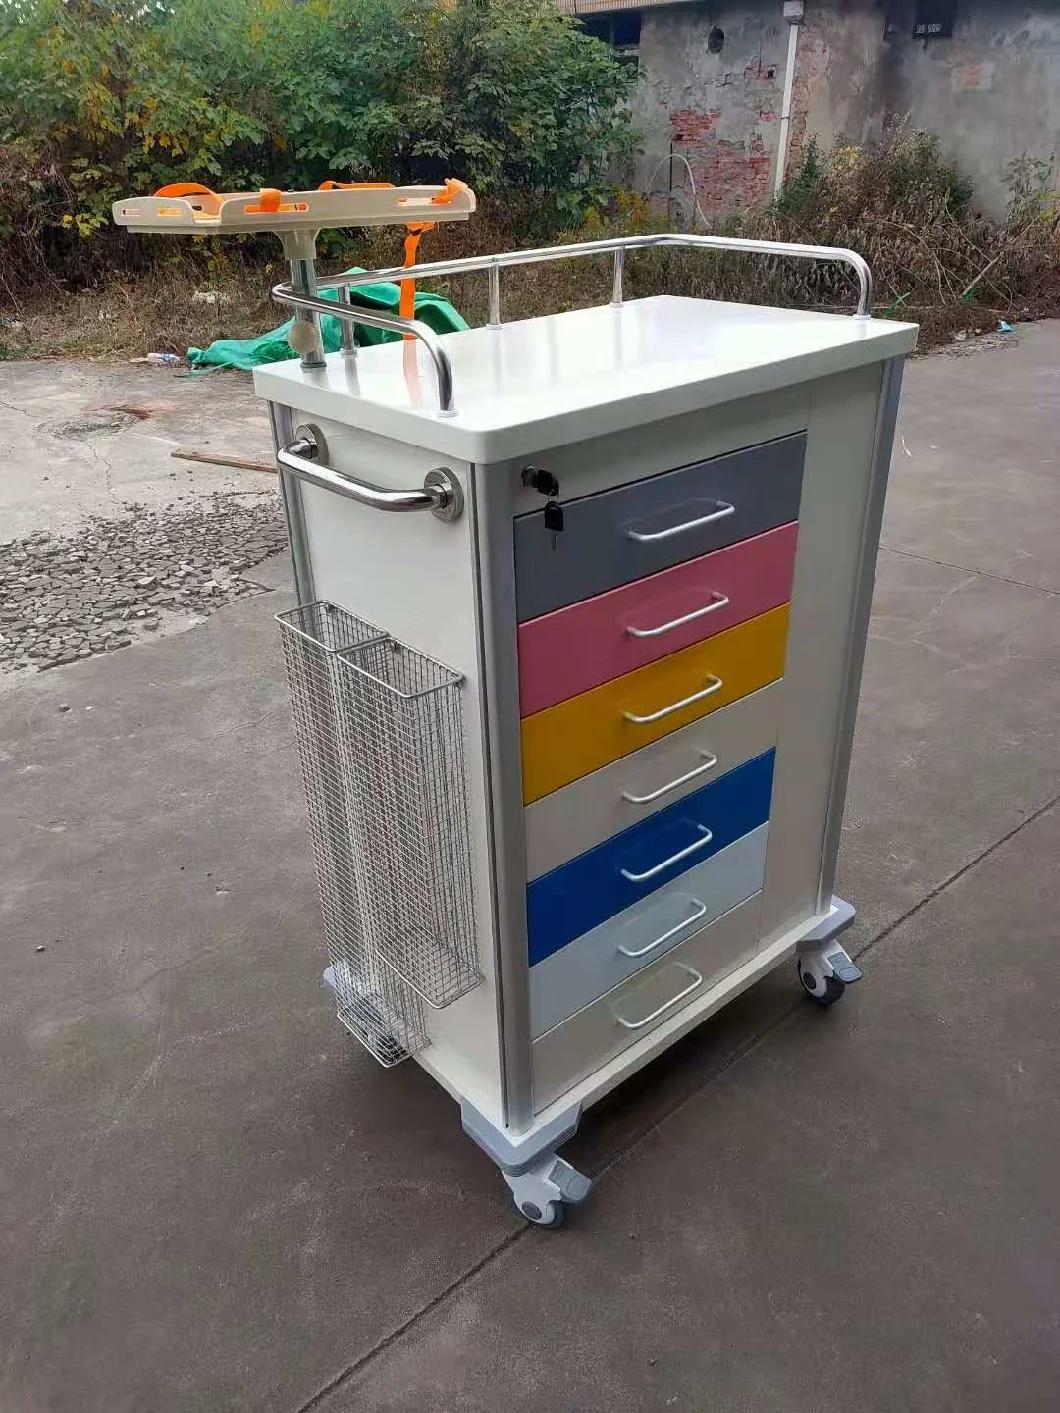 Hot Sales Portable High Quality Medical Cart Trolley with Drawer